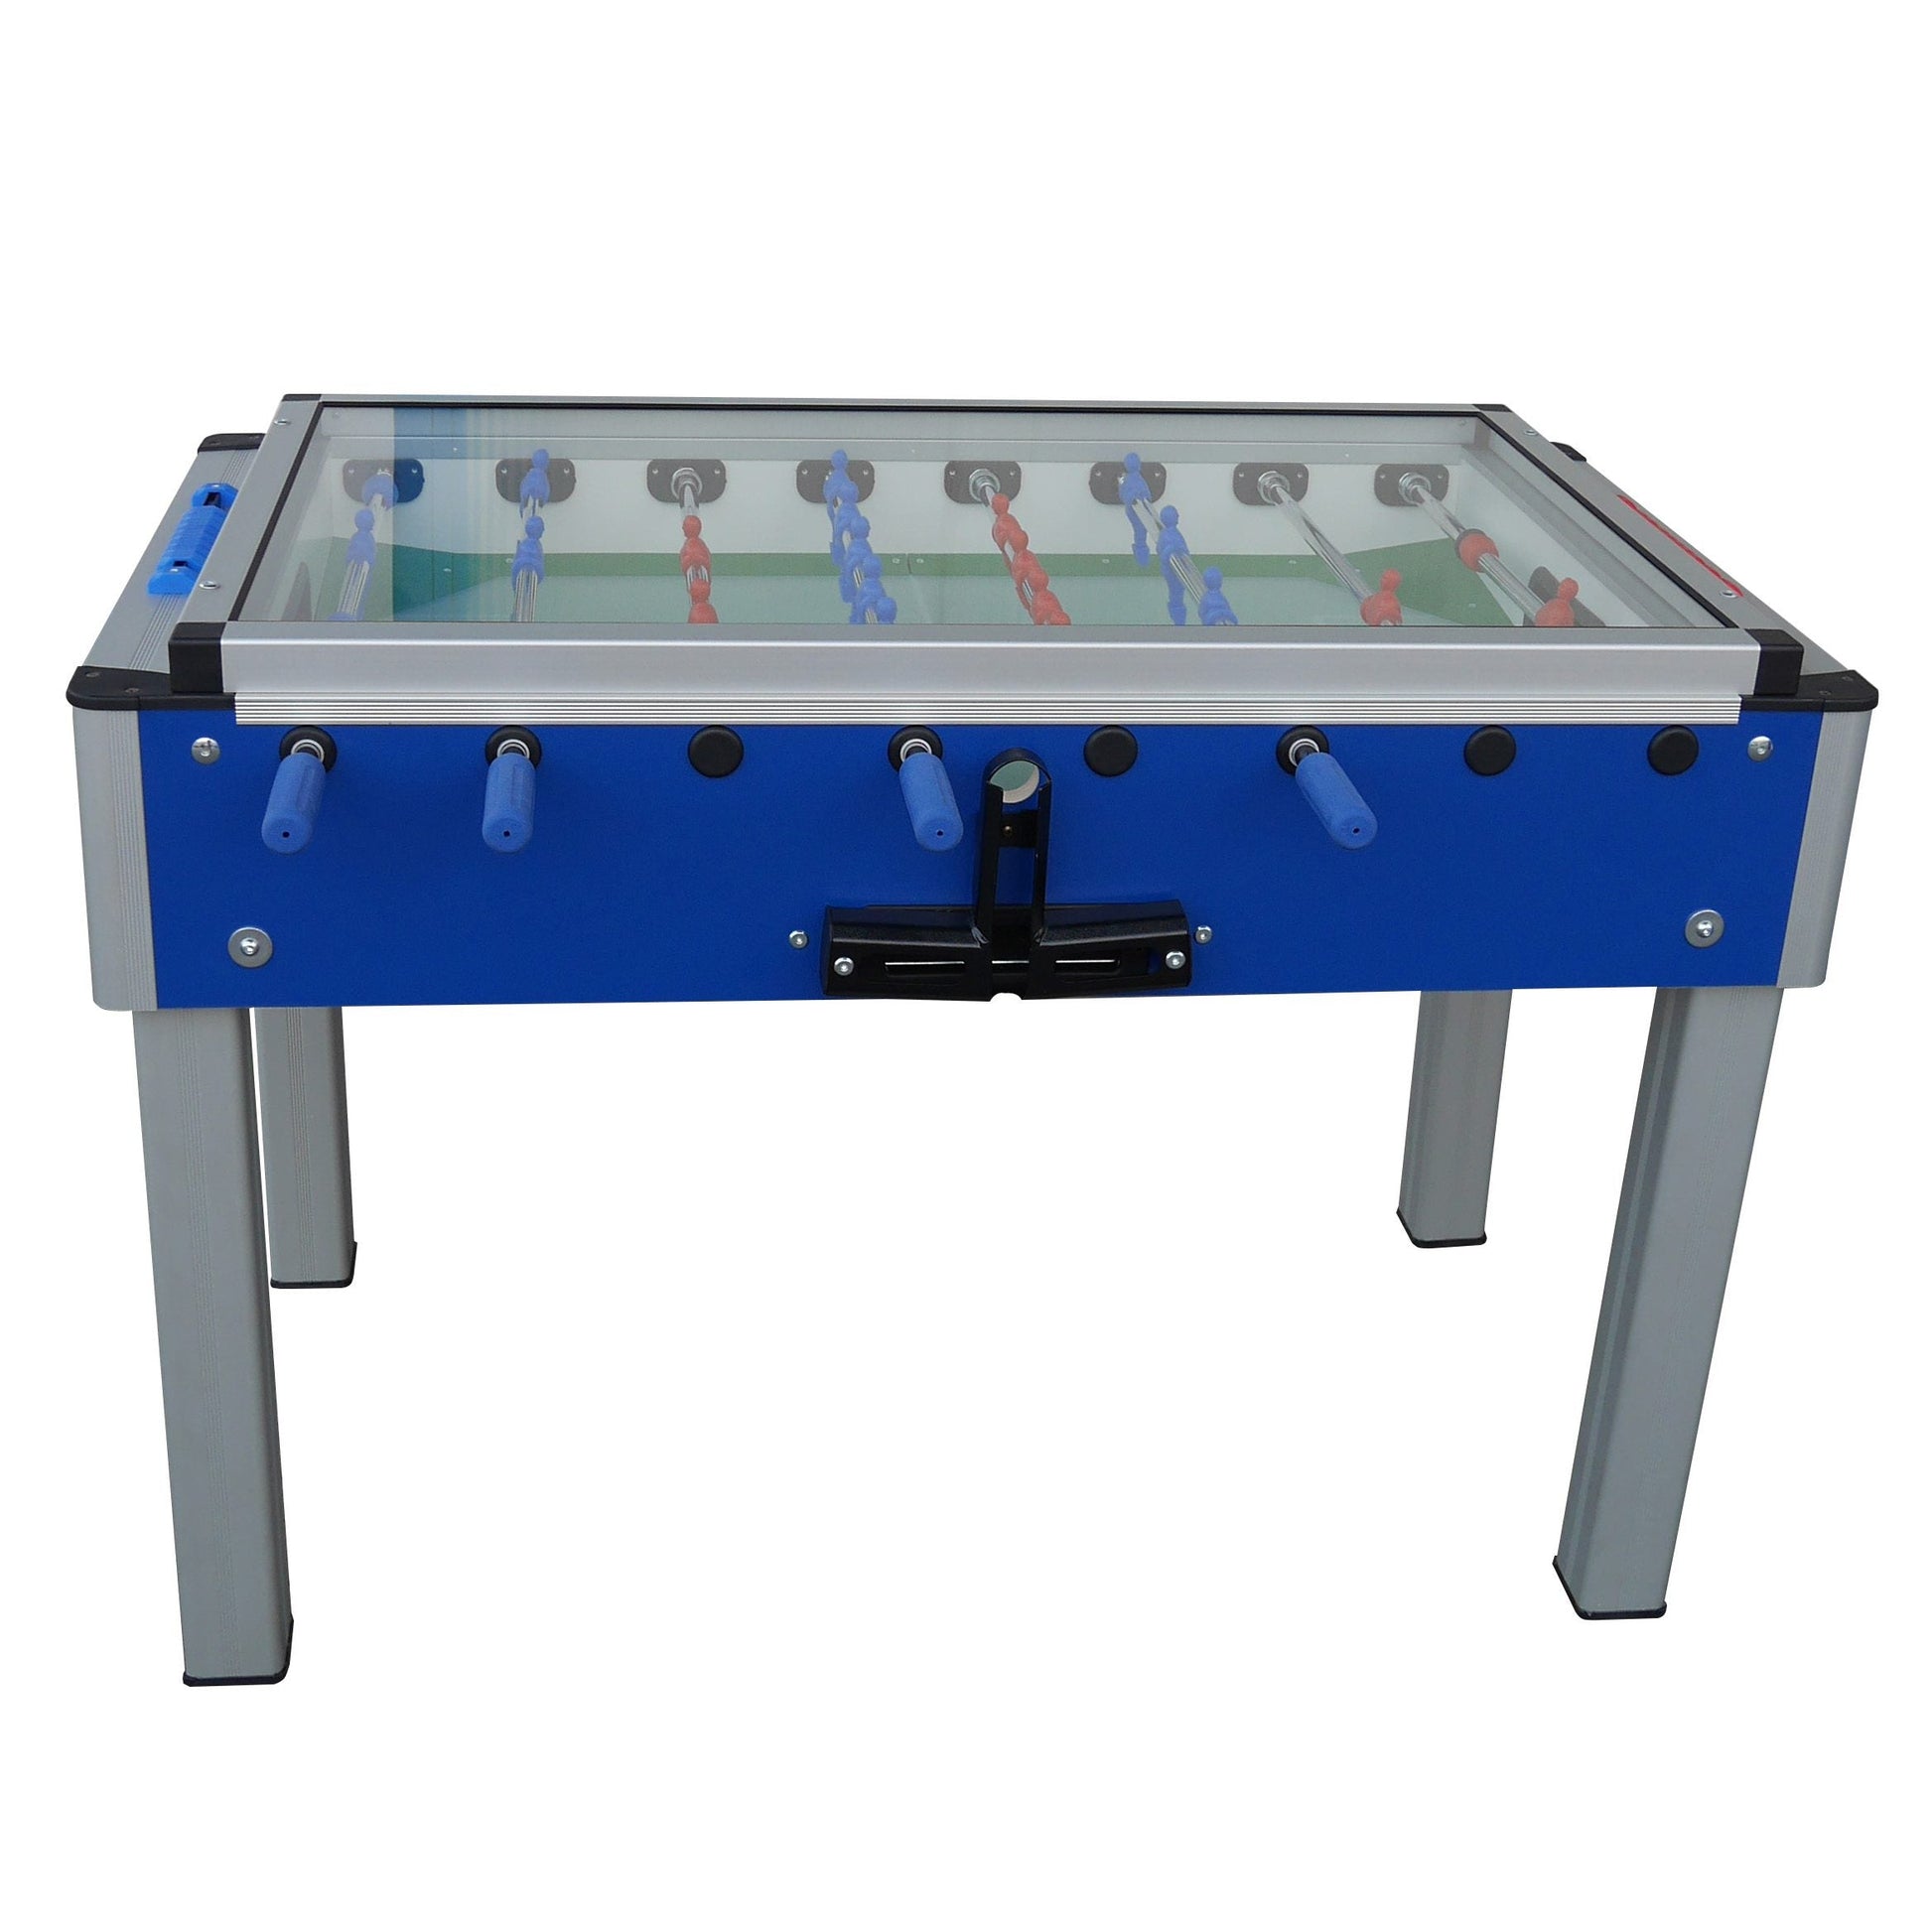 Roberto College Pro Cover Football Table